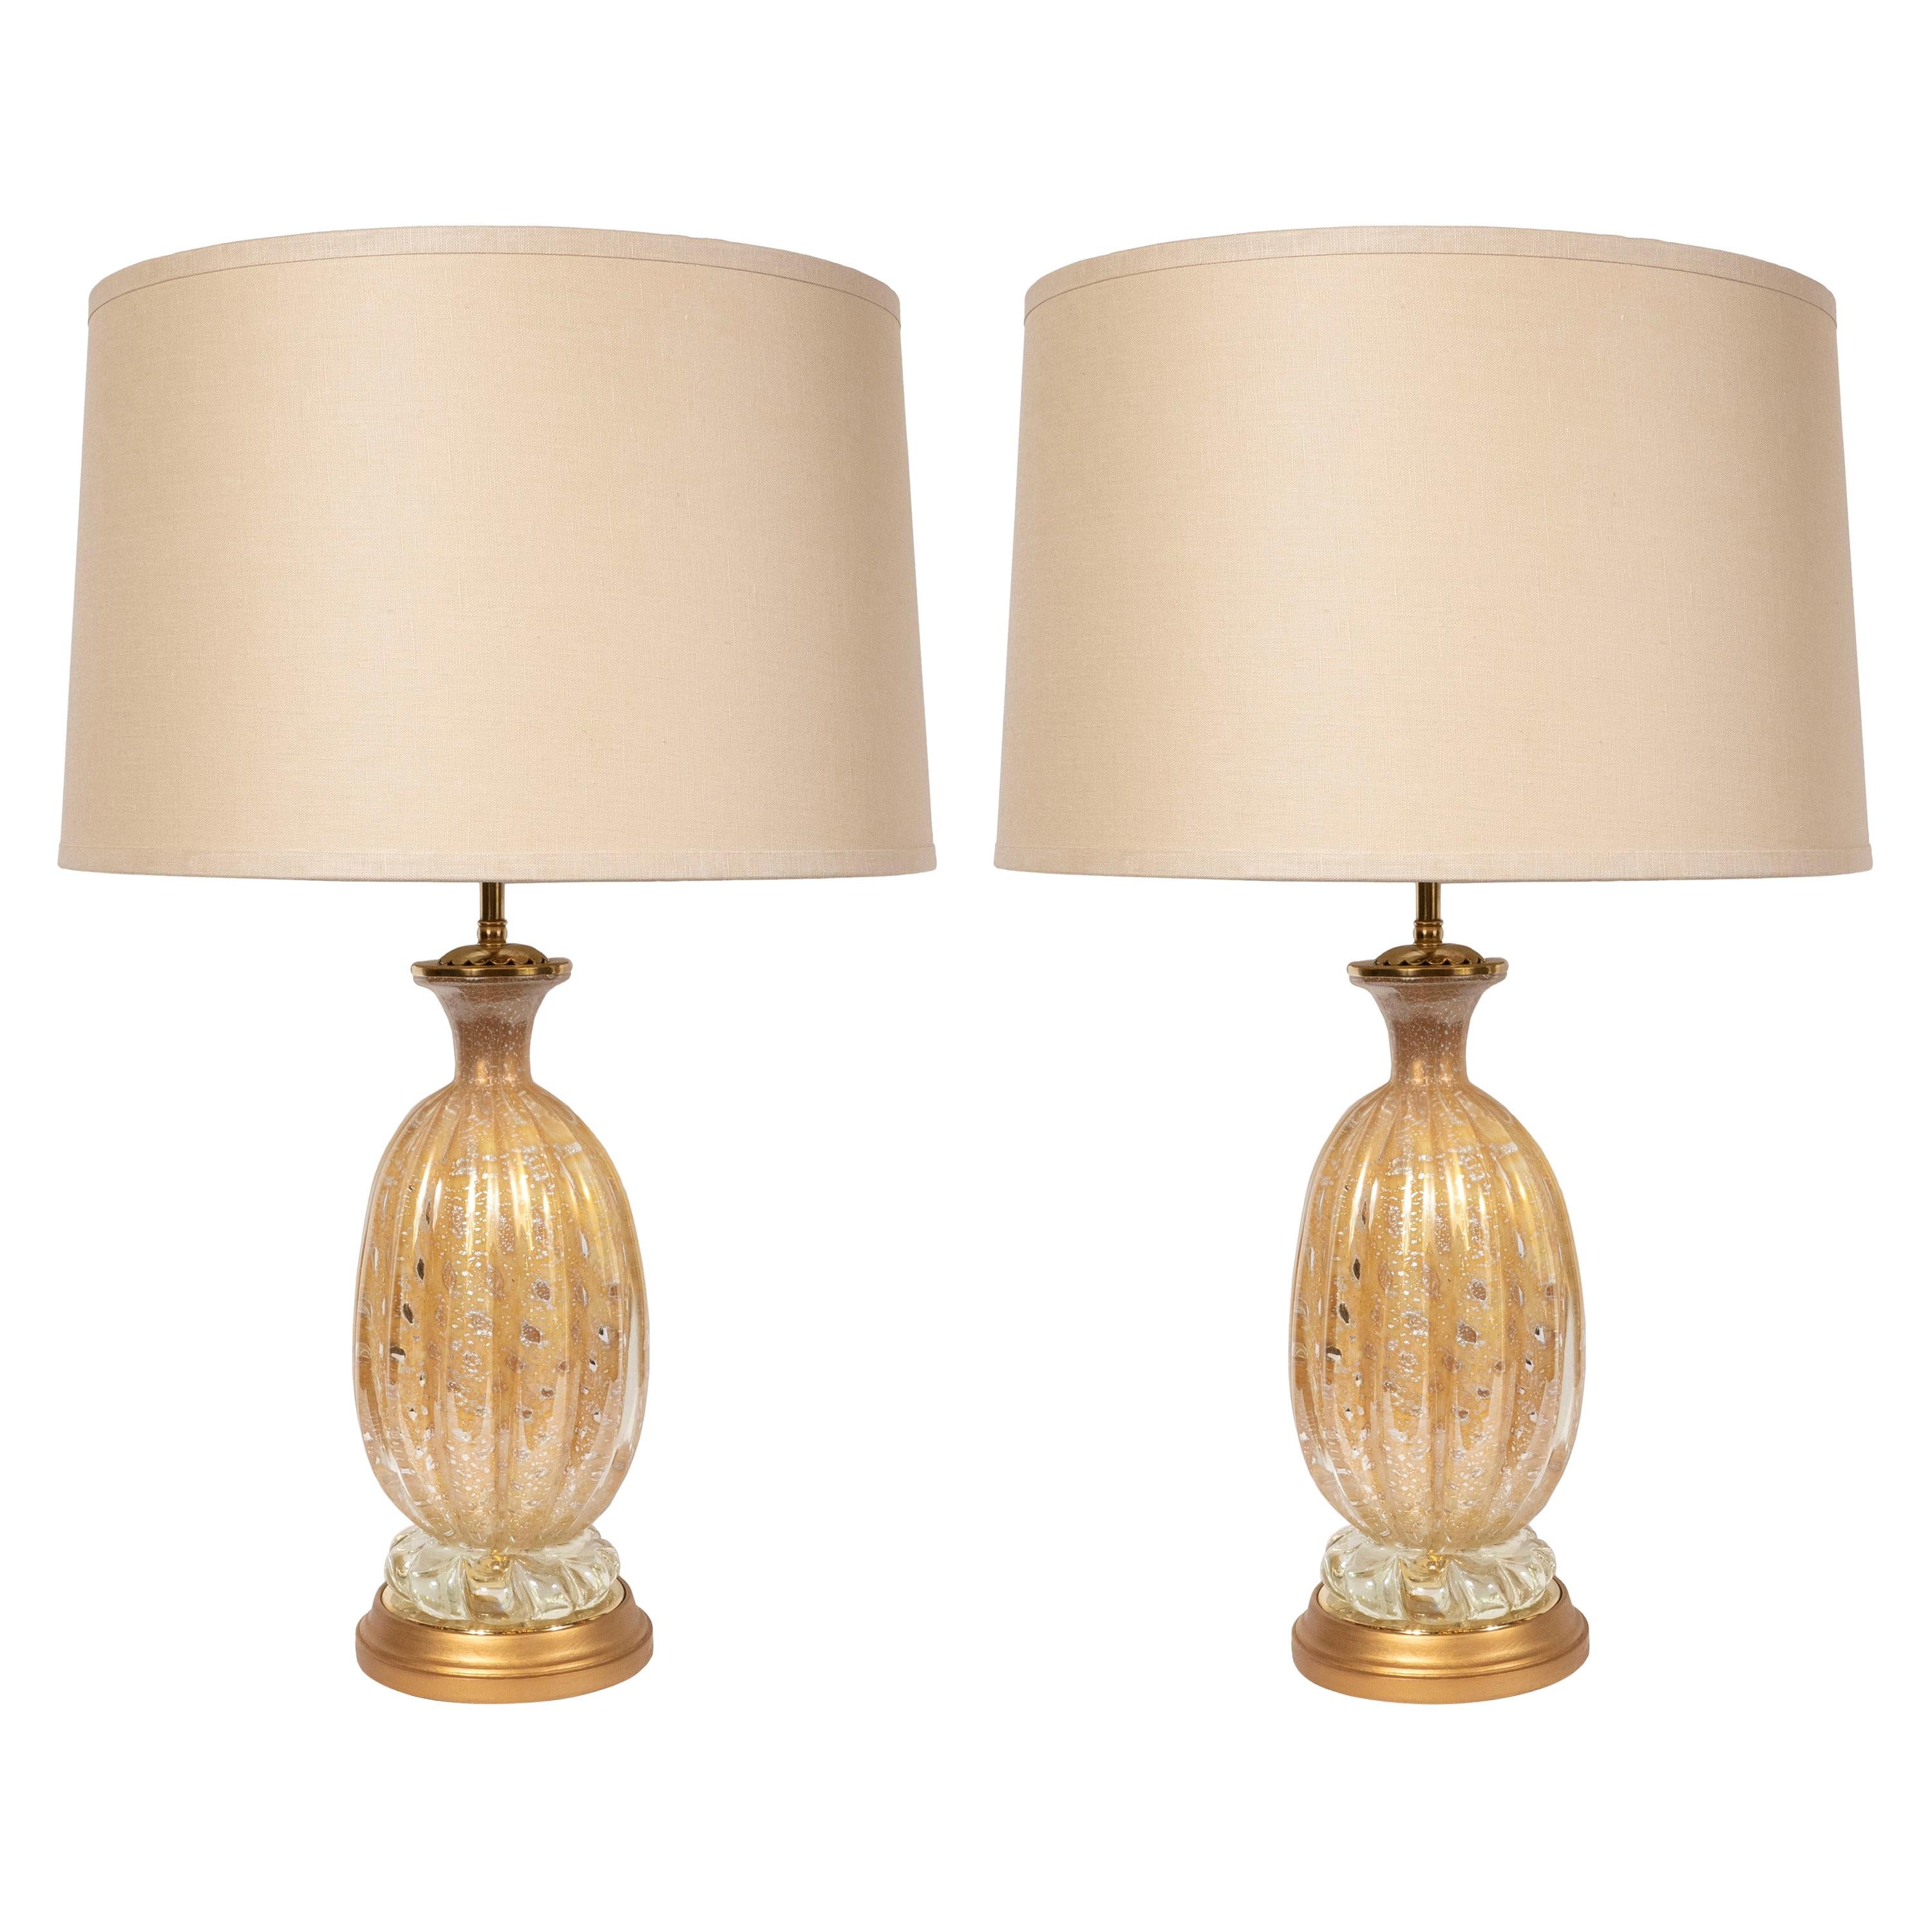 Pair of Mid-Century Modern Channeled 24-Karat Gold Table Lamps, Barovier e Toso